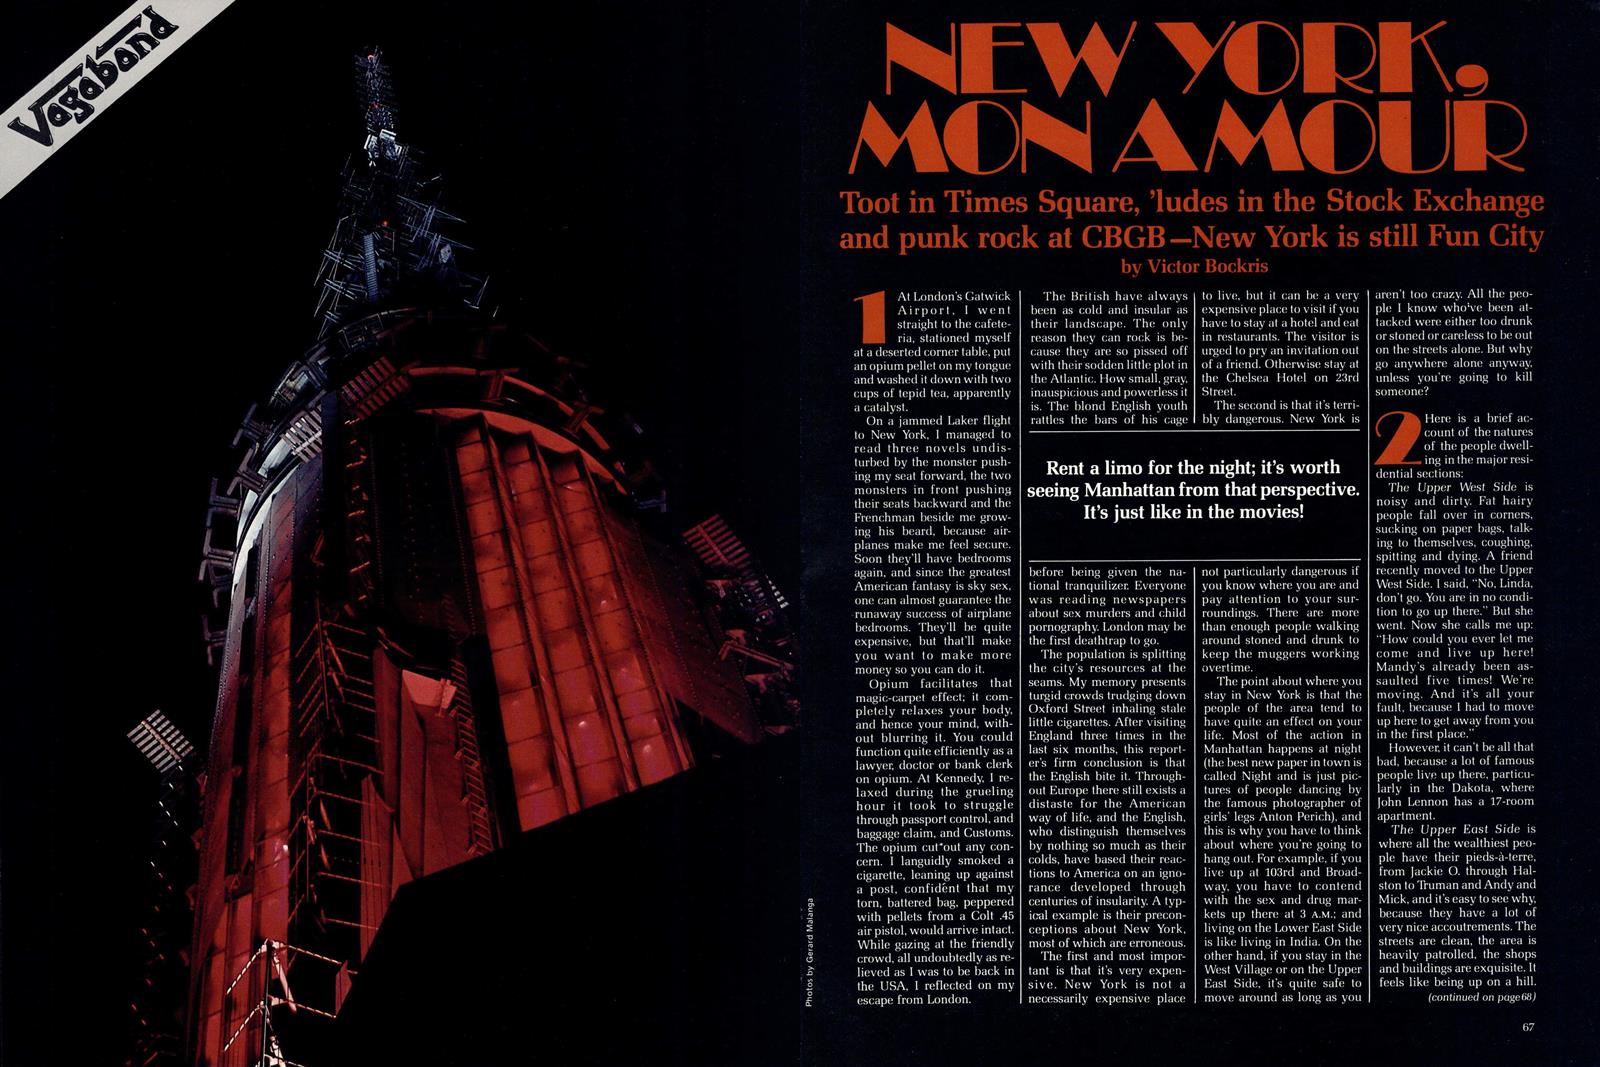 From the Archives: New York, Mon Amour (1979)